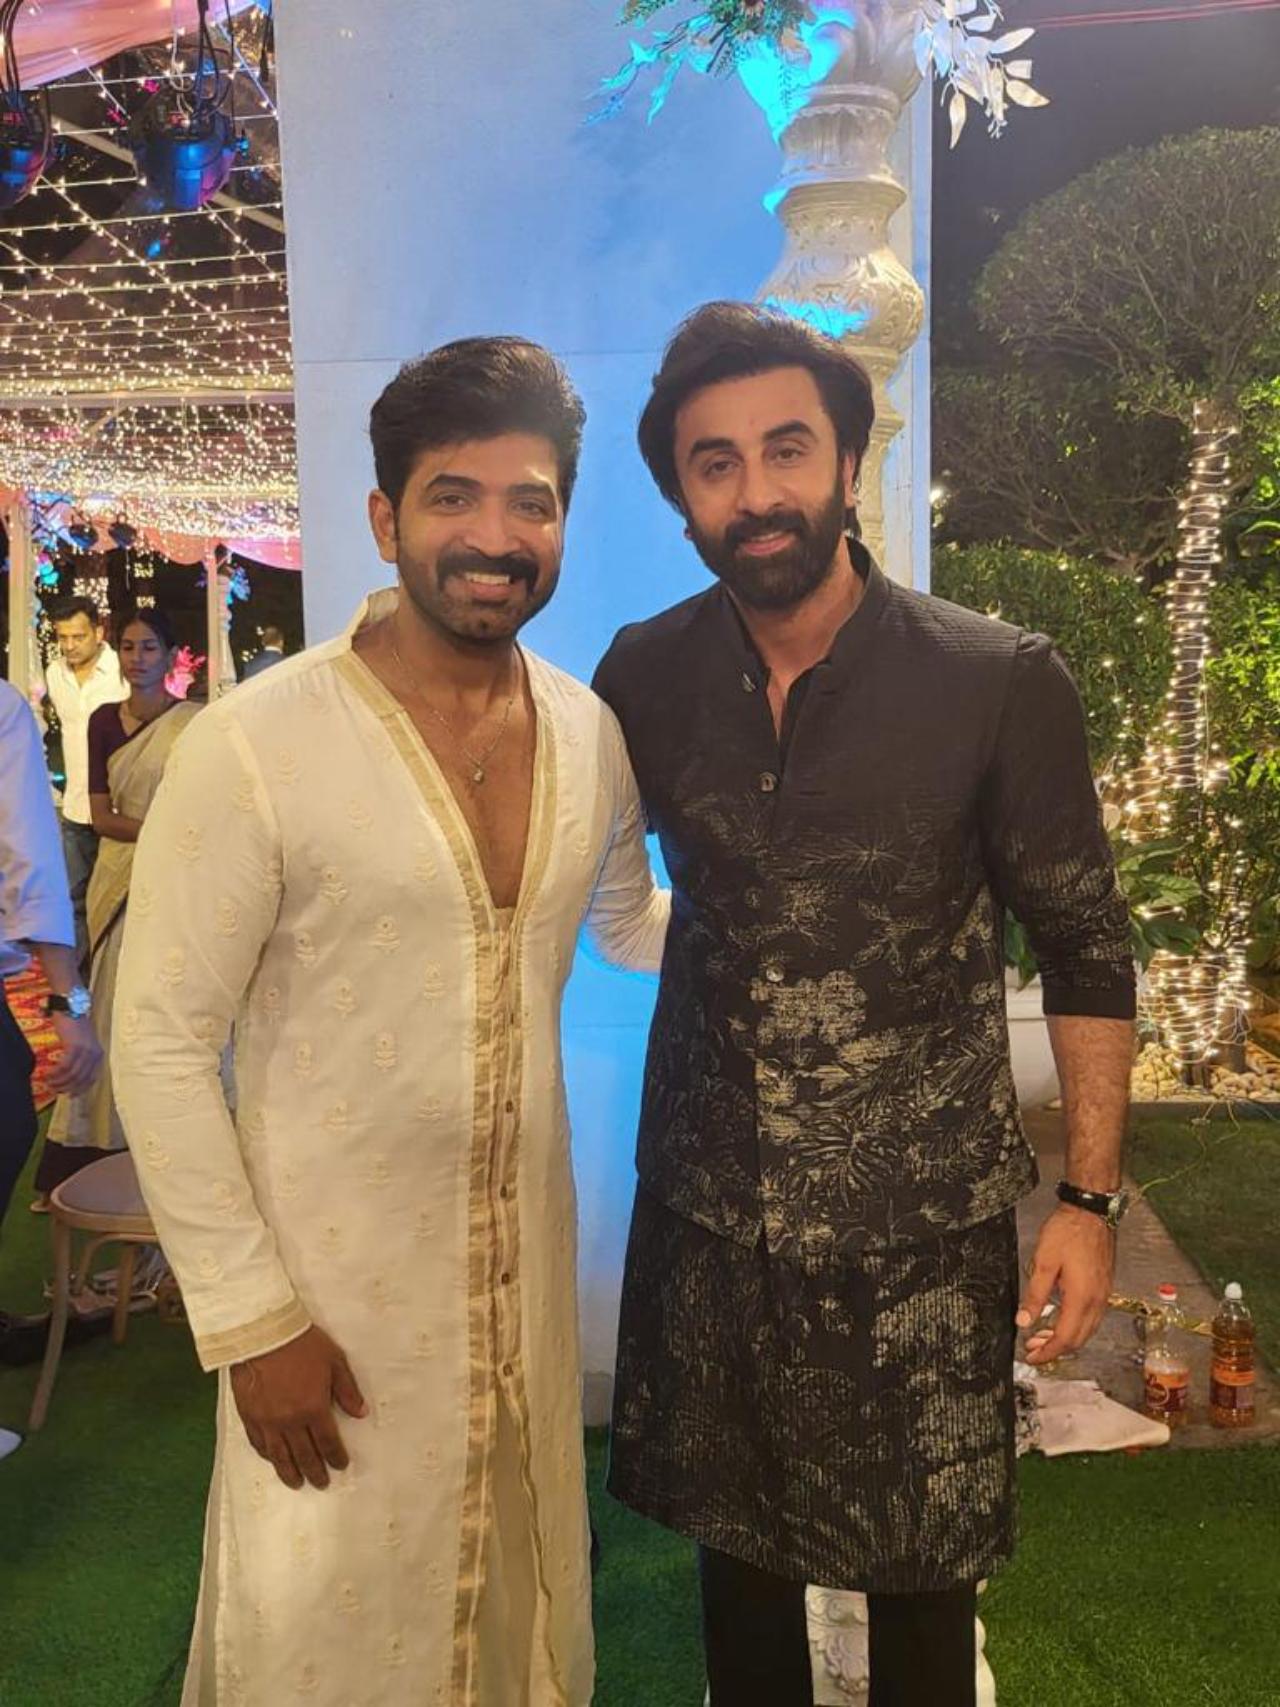 Ranbir Kapoor poses for a picture with actor Arun Vijay